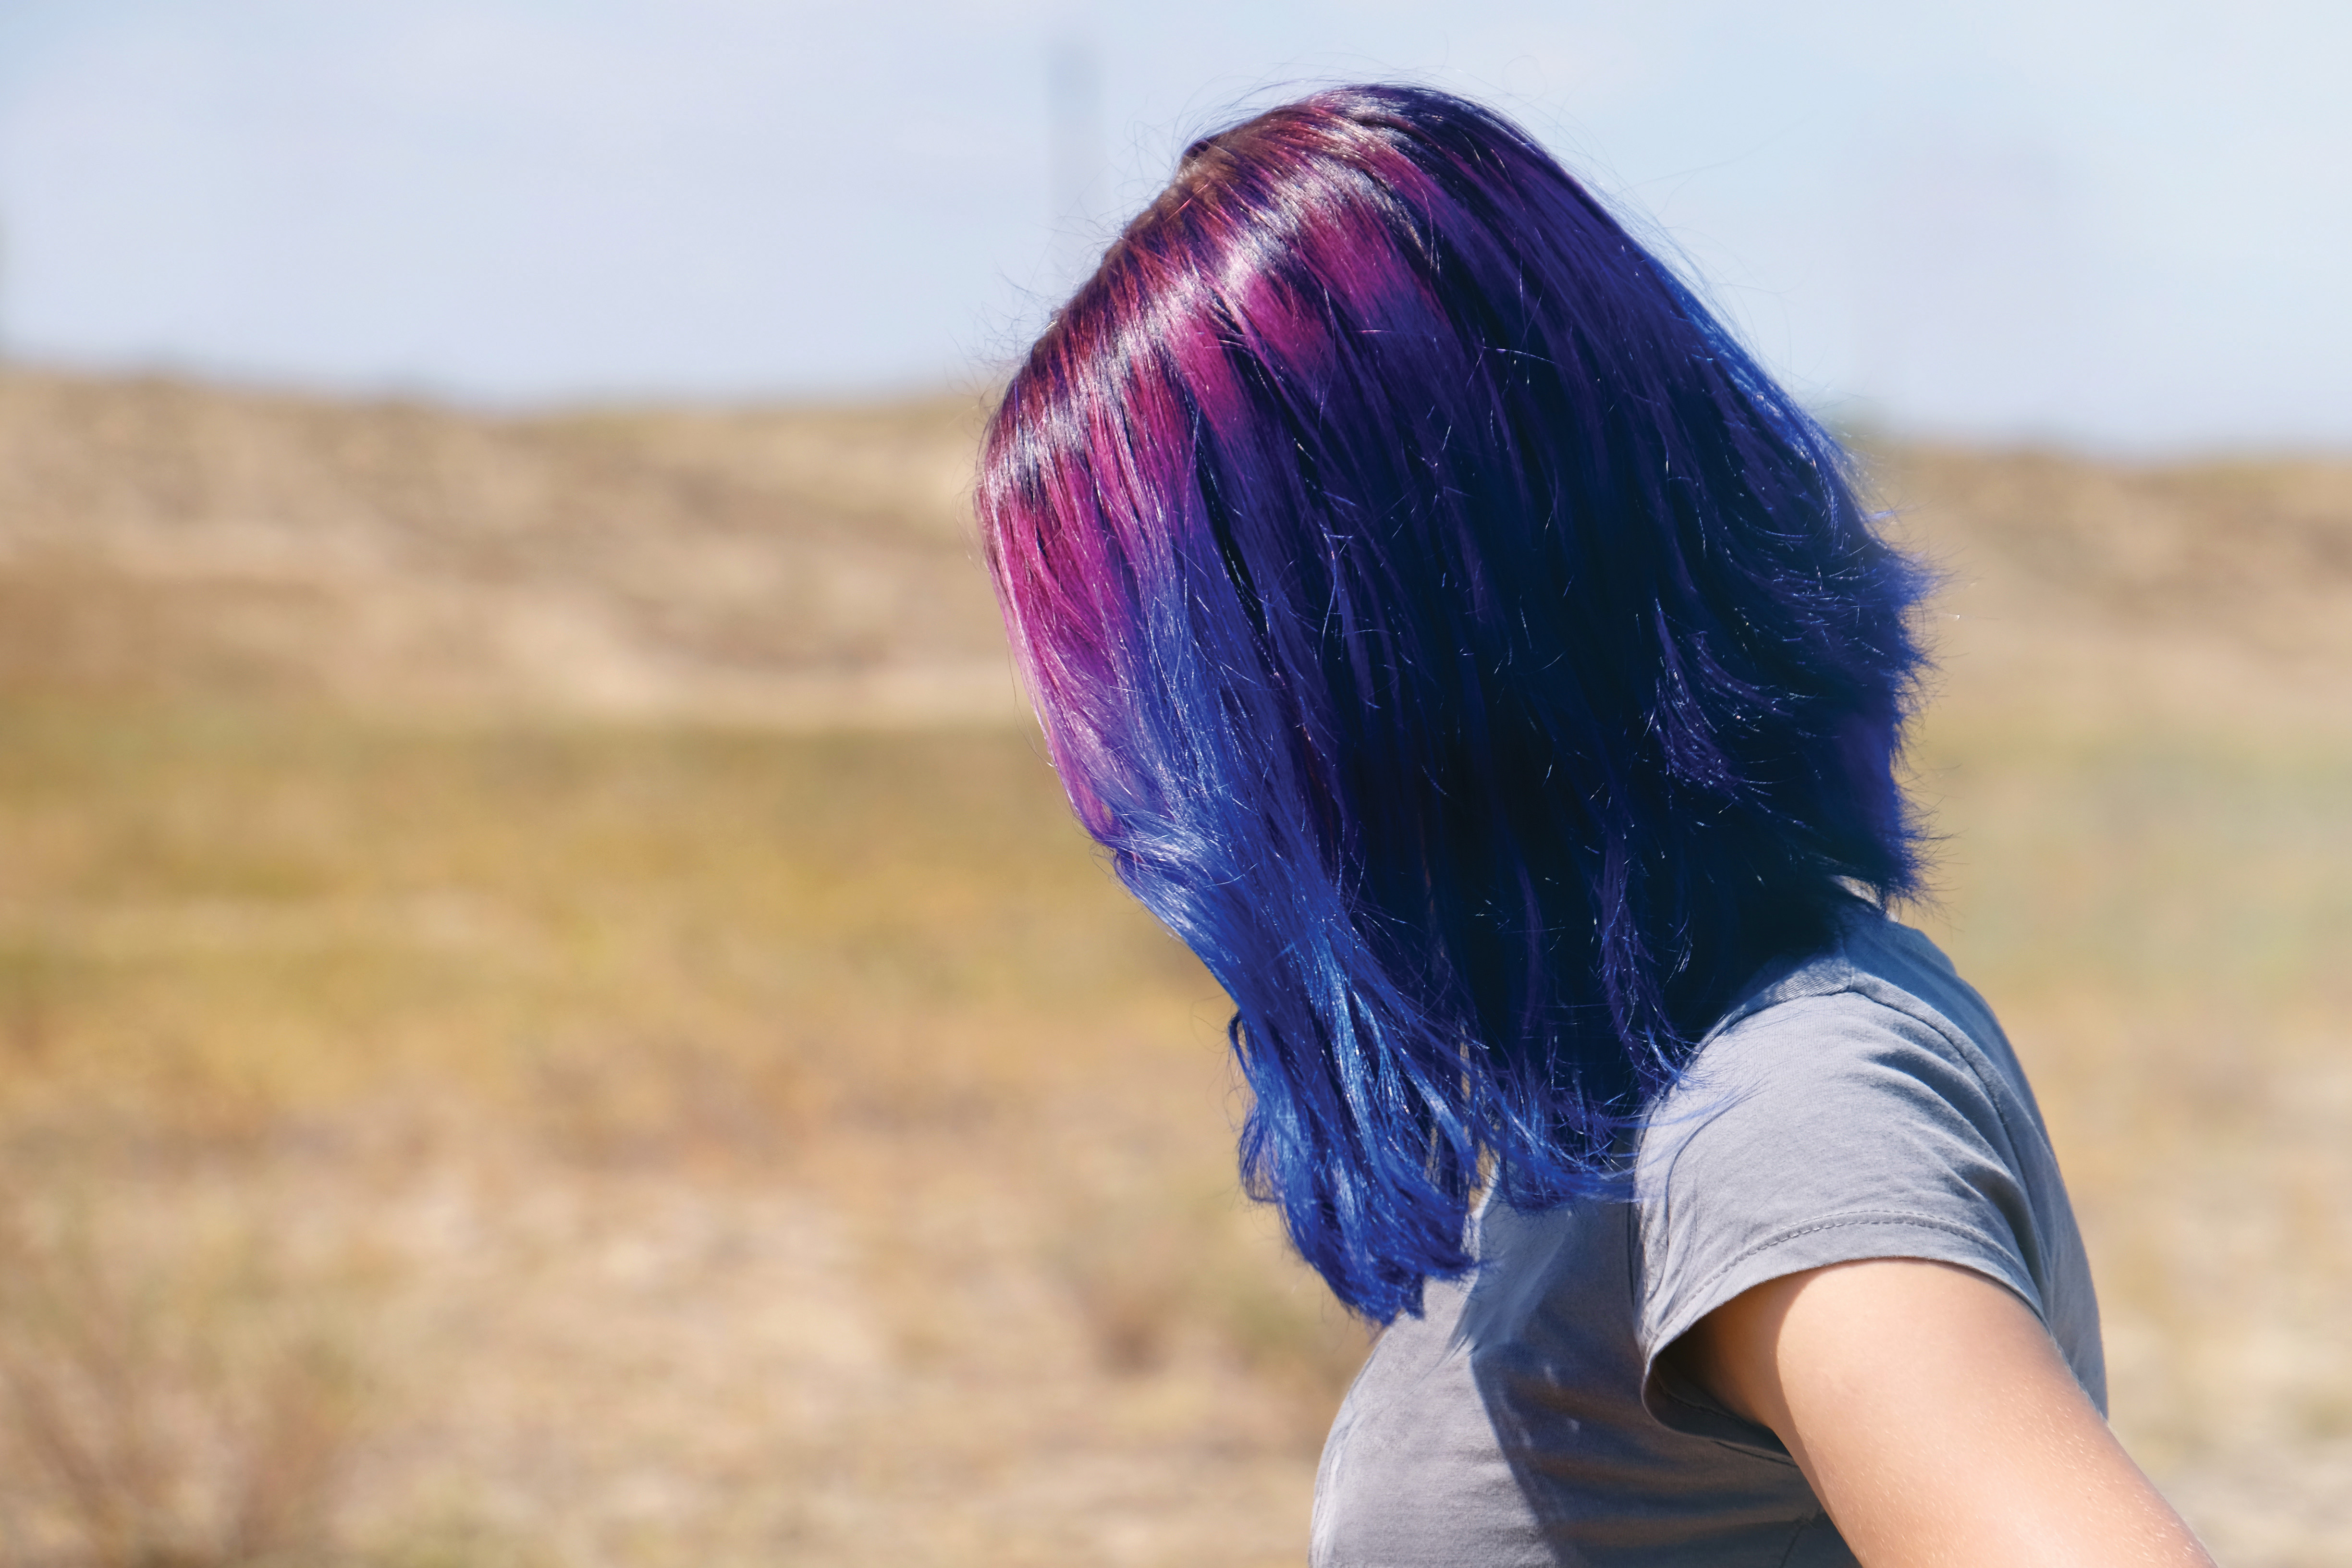 Neon hair colors a distraction in class? | The Daily Courier | Prescott, AZ